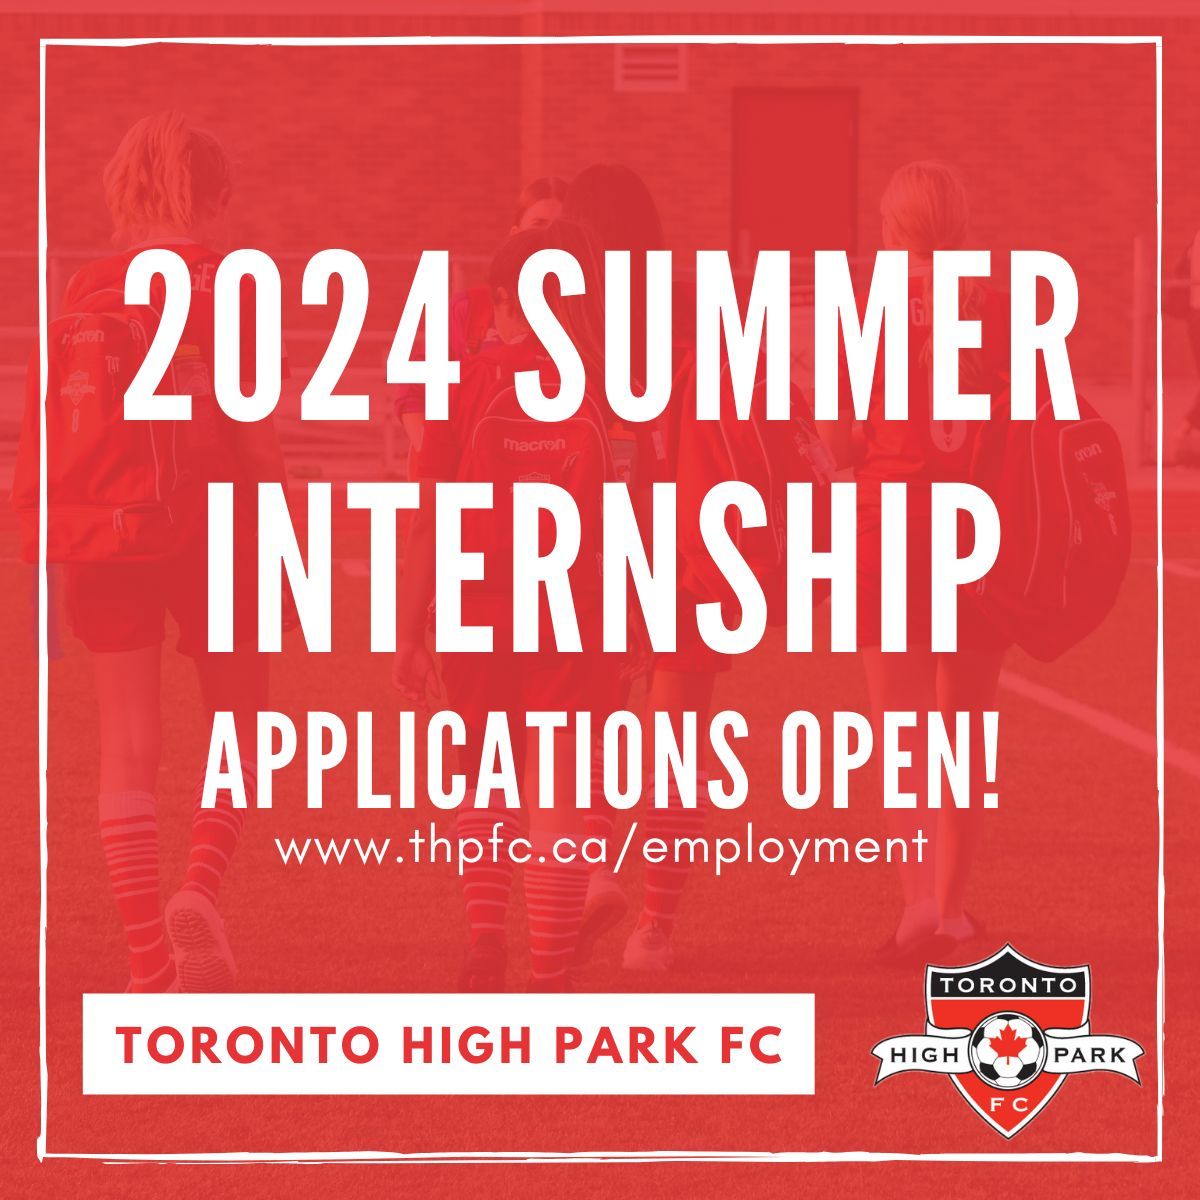 Are you passionate about soccer and community engagement? We're looking for a Grassroots Intern to join our team at THPFC! 🌱 You'll work closely with our Manager of Recreation to help plan & deliver soccer programs in the vibrant High Park community. ⚽️ buff.ly/3lxc2EU